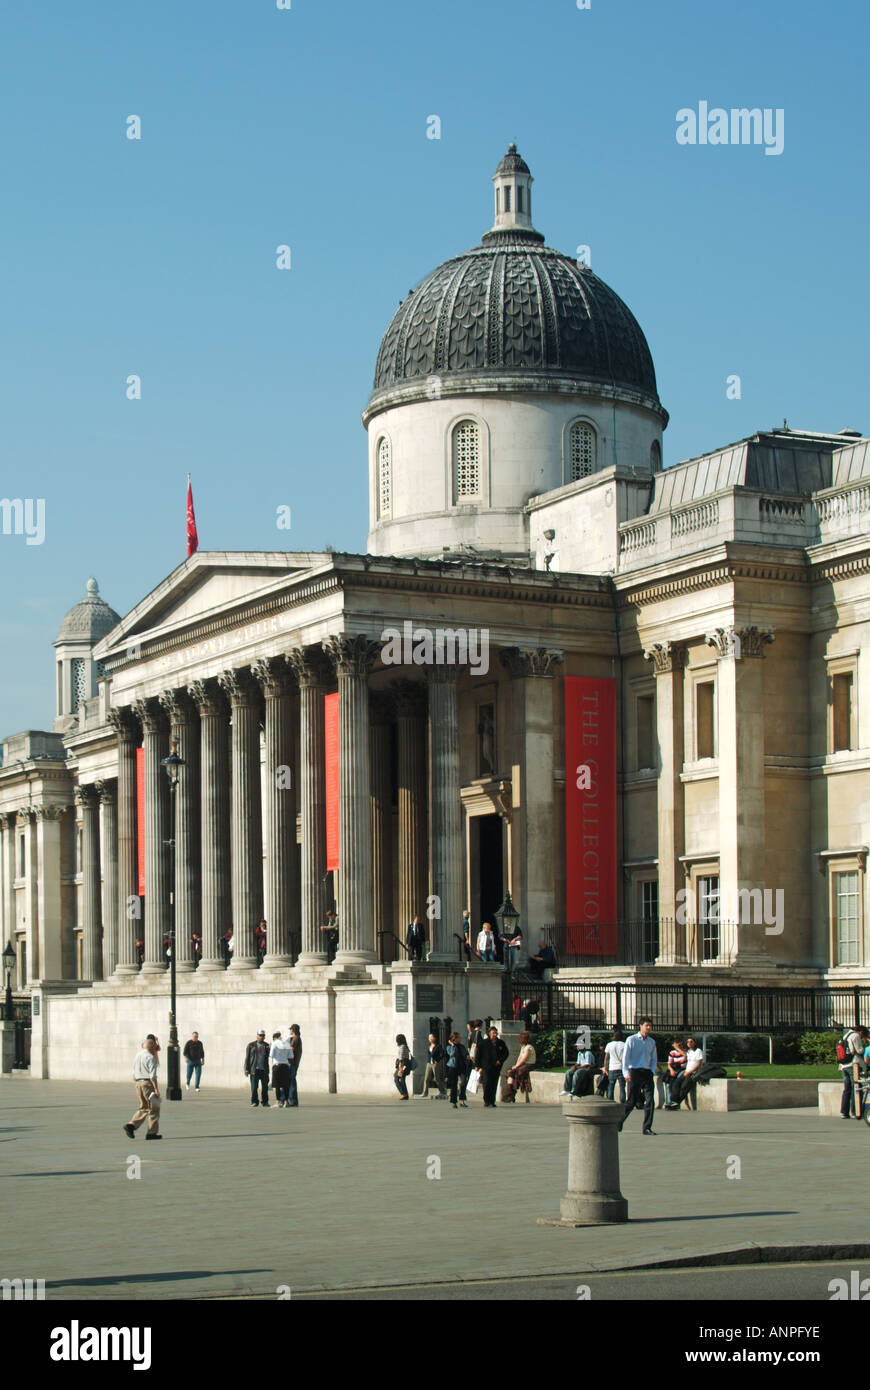 National Gallery art museum original main entrance & colonnade on the concourse overlooking Trafalgar Square in City of Westminster London England UK Stock Photo